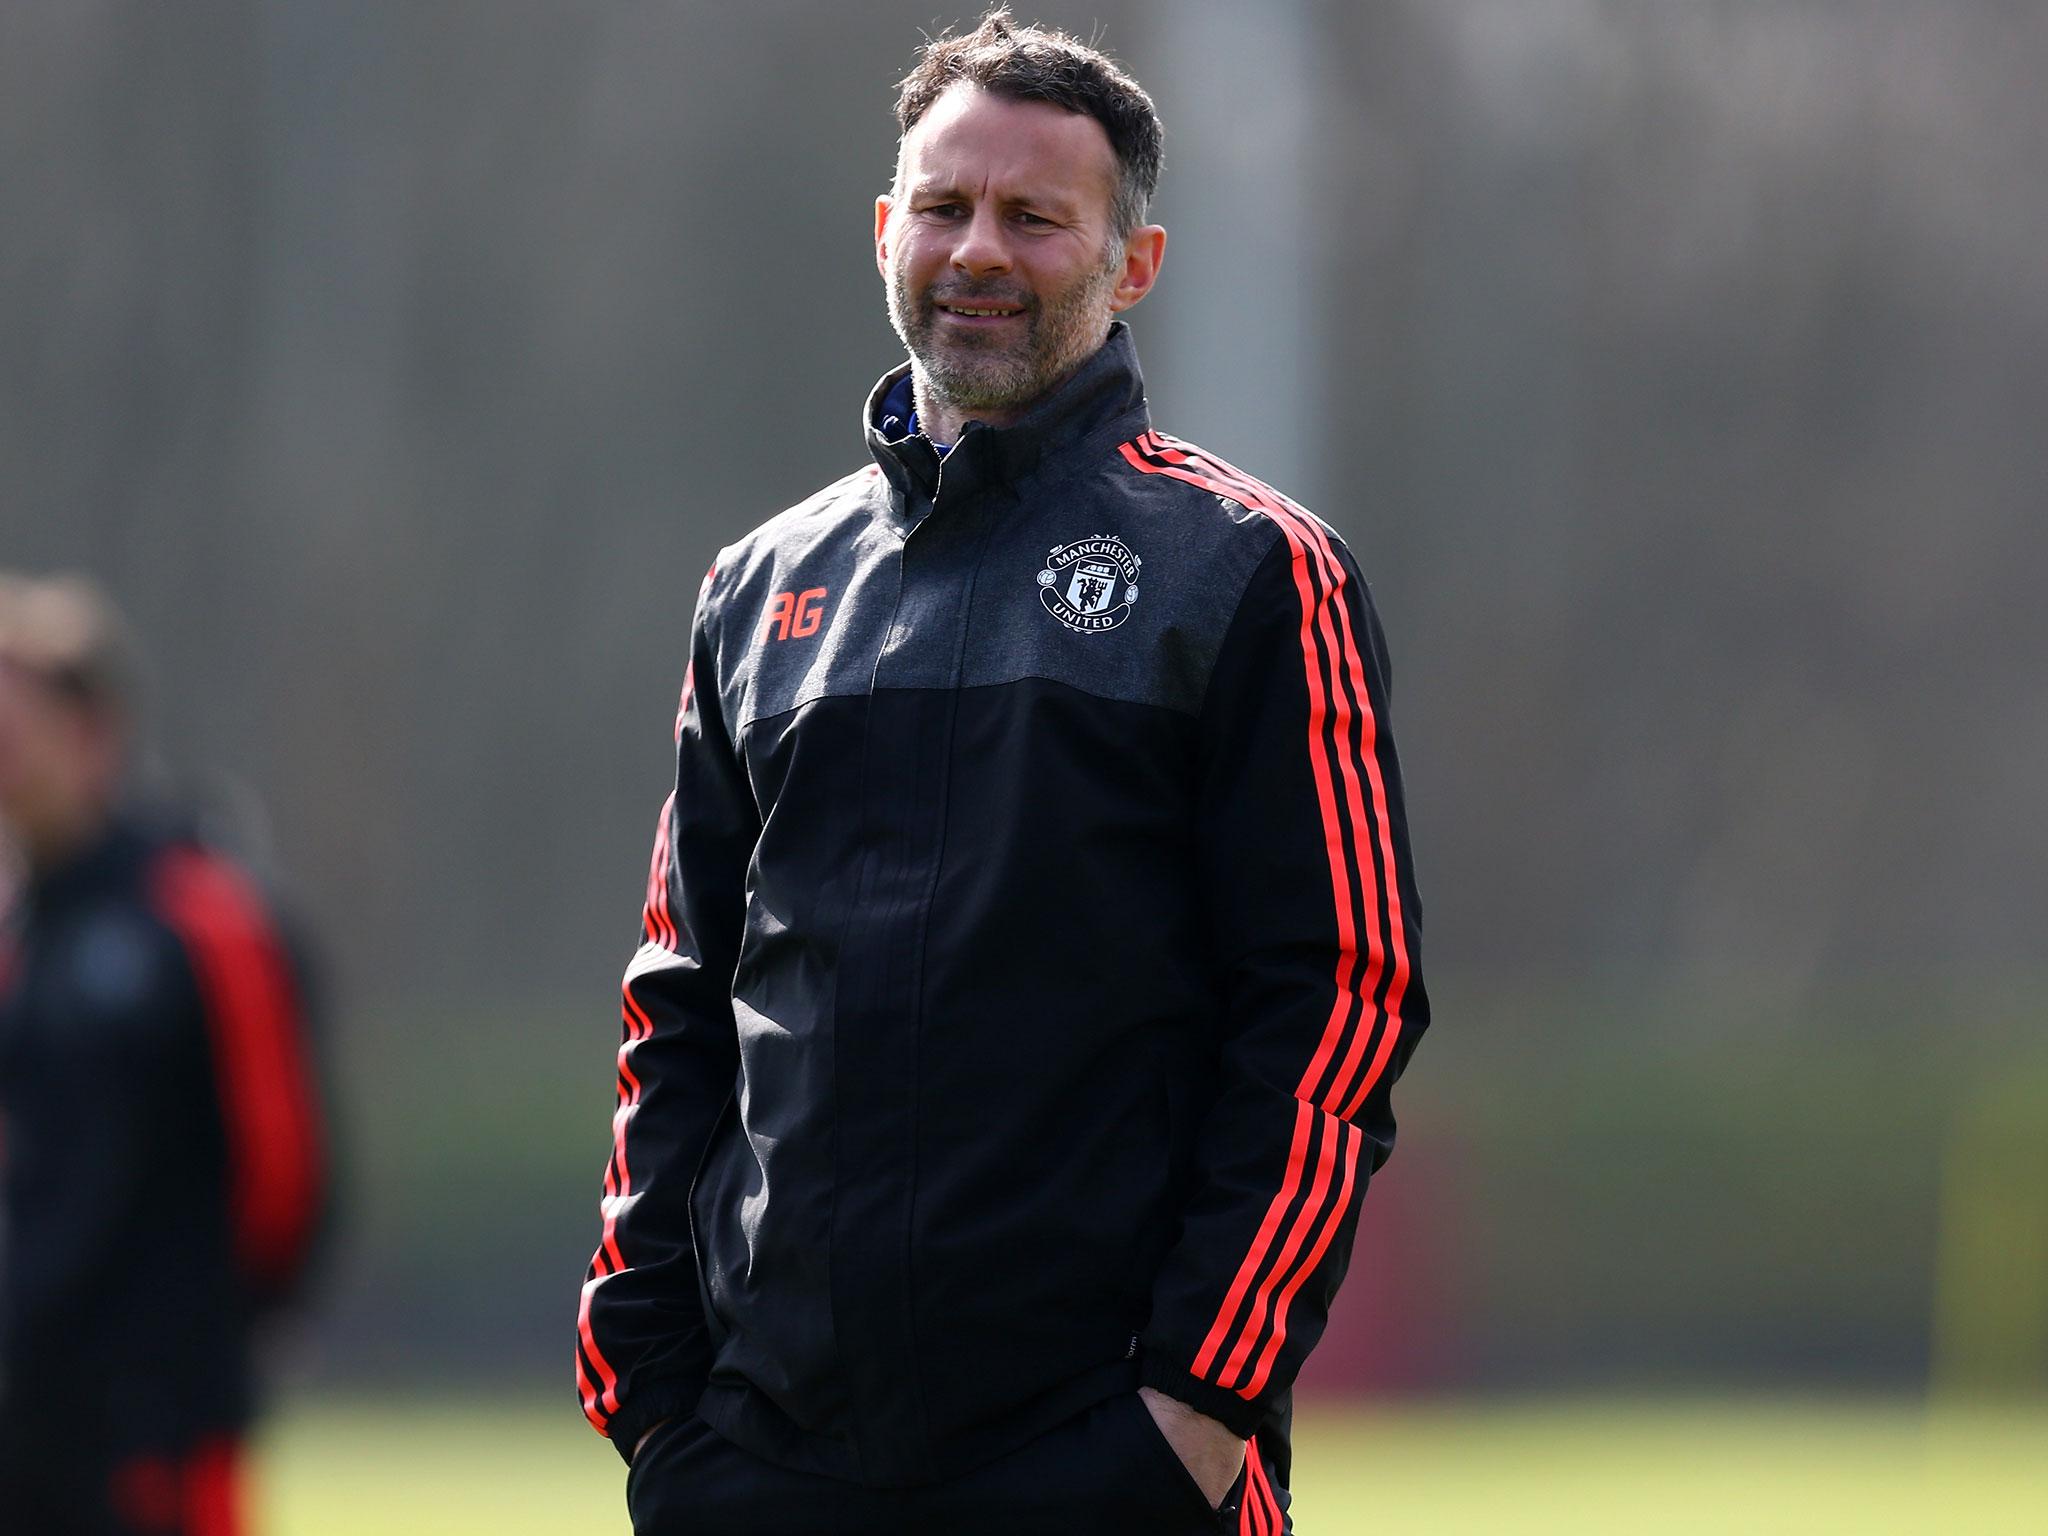 Ryan Giggs was the immediate favourite to become the next Swansea manager even though he has little experience